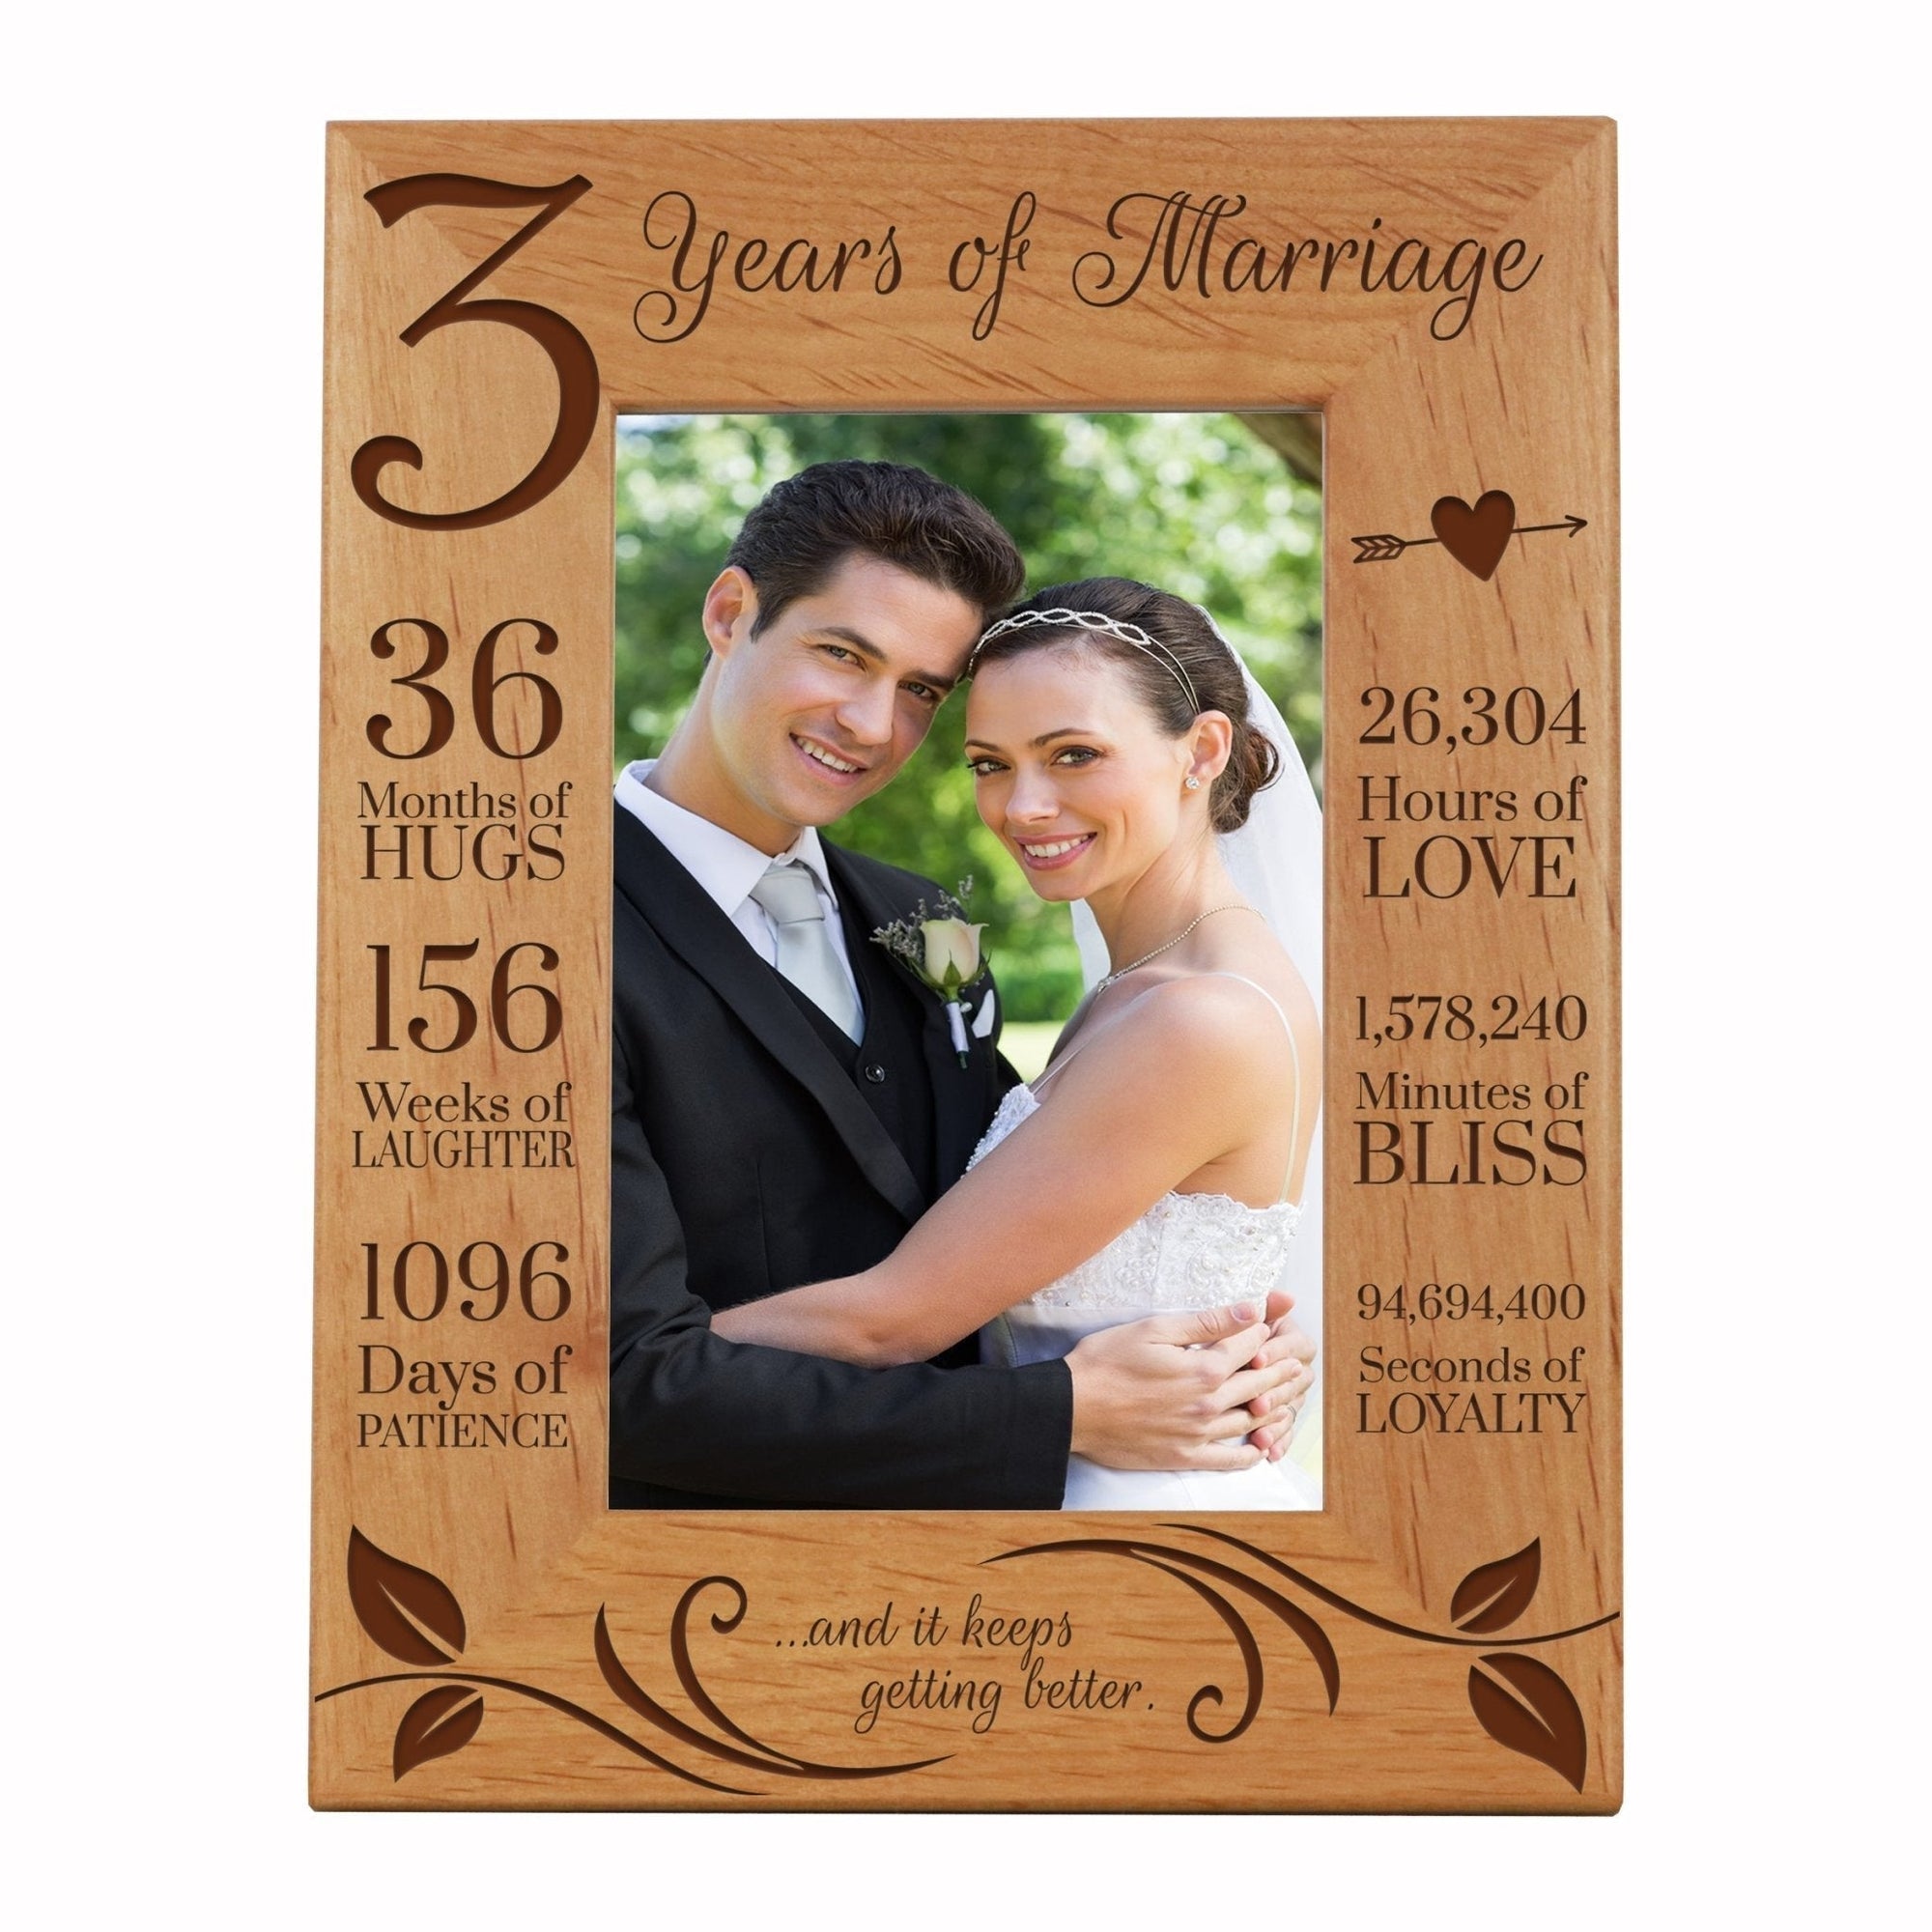 Engraved 3rd Wedding Anniversary Photo Frame Wall Decor Gift for Couples - Keeps Getting Better - LifeSong Milestones